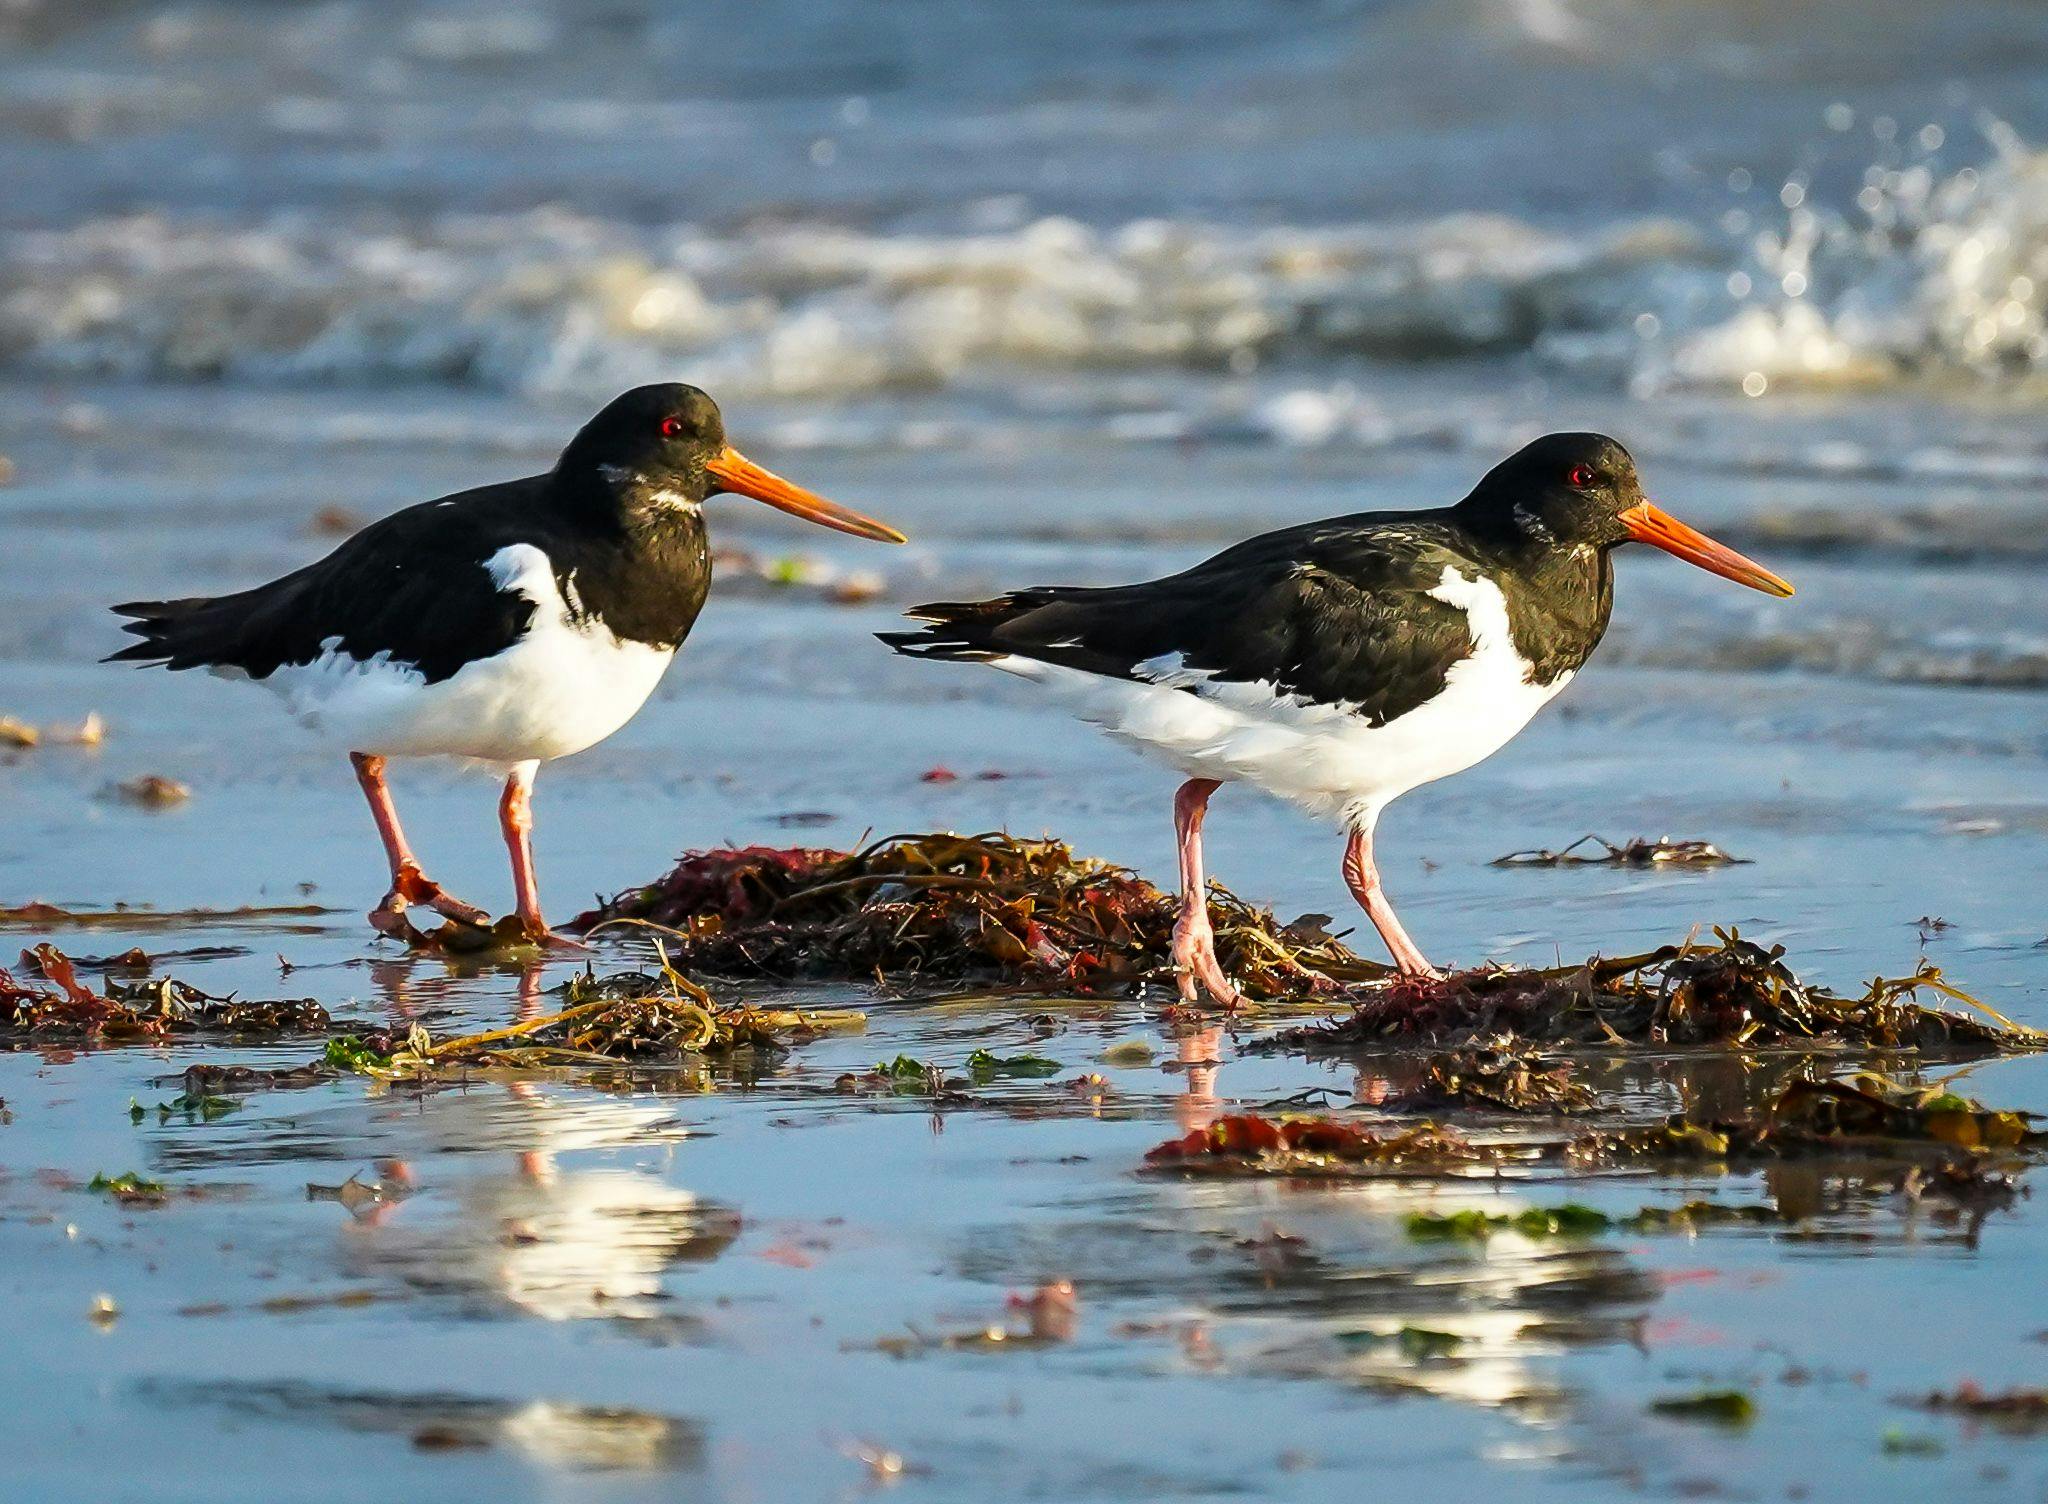 a pair of oystercatchers, black backed and white breasted birds with orange pointy beaks on the sand at low tide